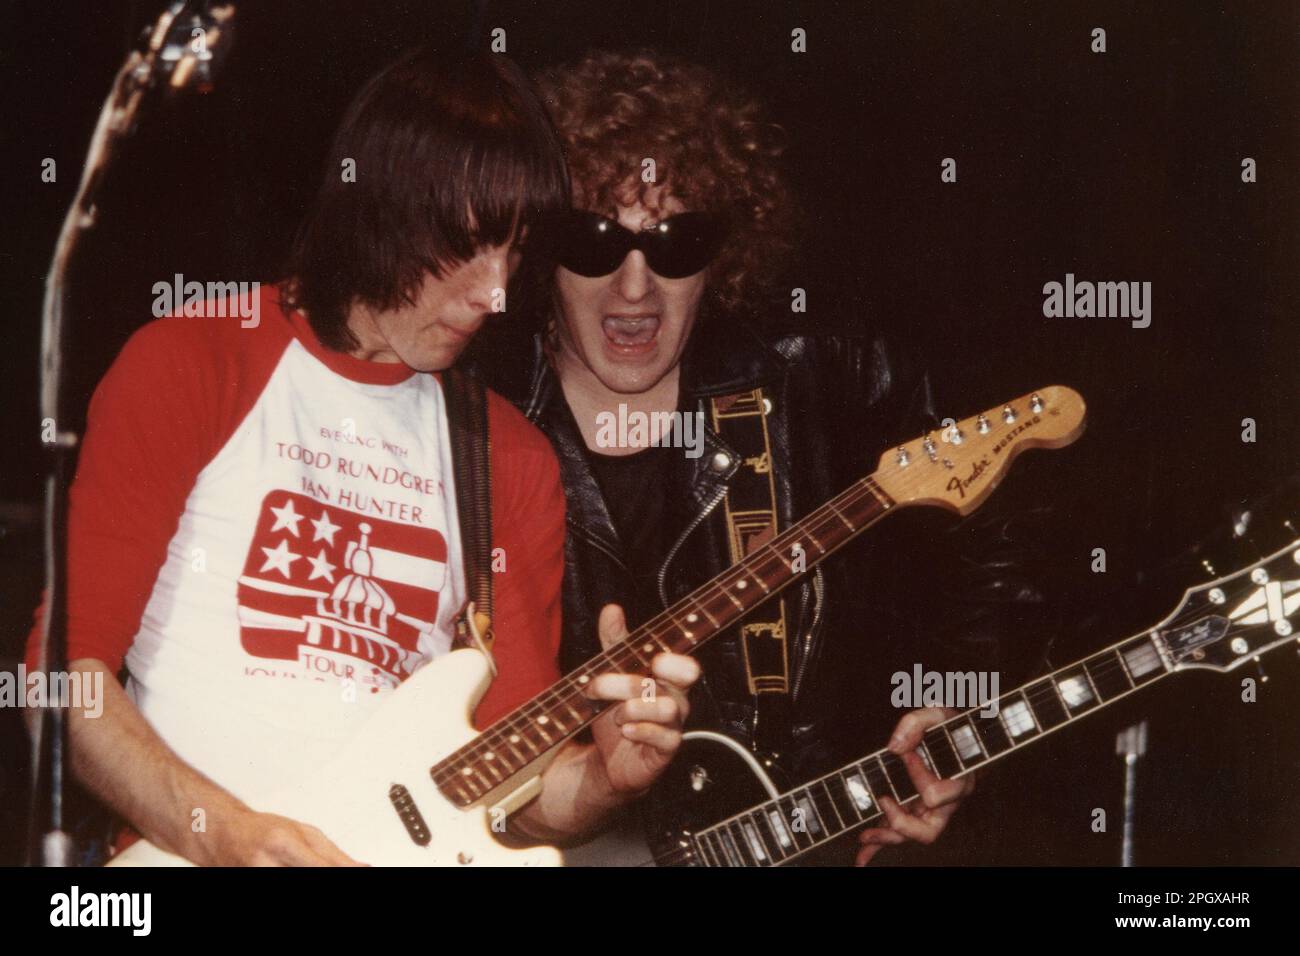 Todd Rundgren and Ian Hunter playing a benefit concert for presidential candidate John Anderson at Ocean State Performing Arts Center in Providence, Rhode Island, October 6, 1980. Stock Photo